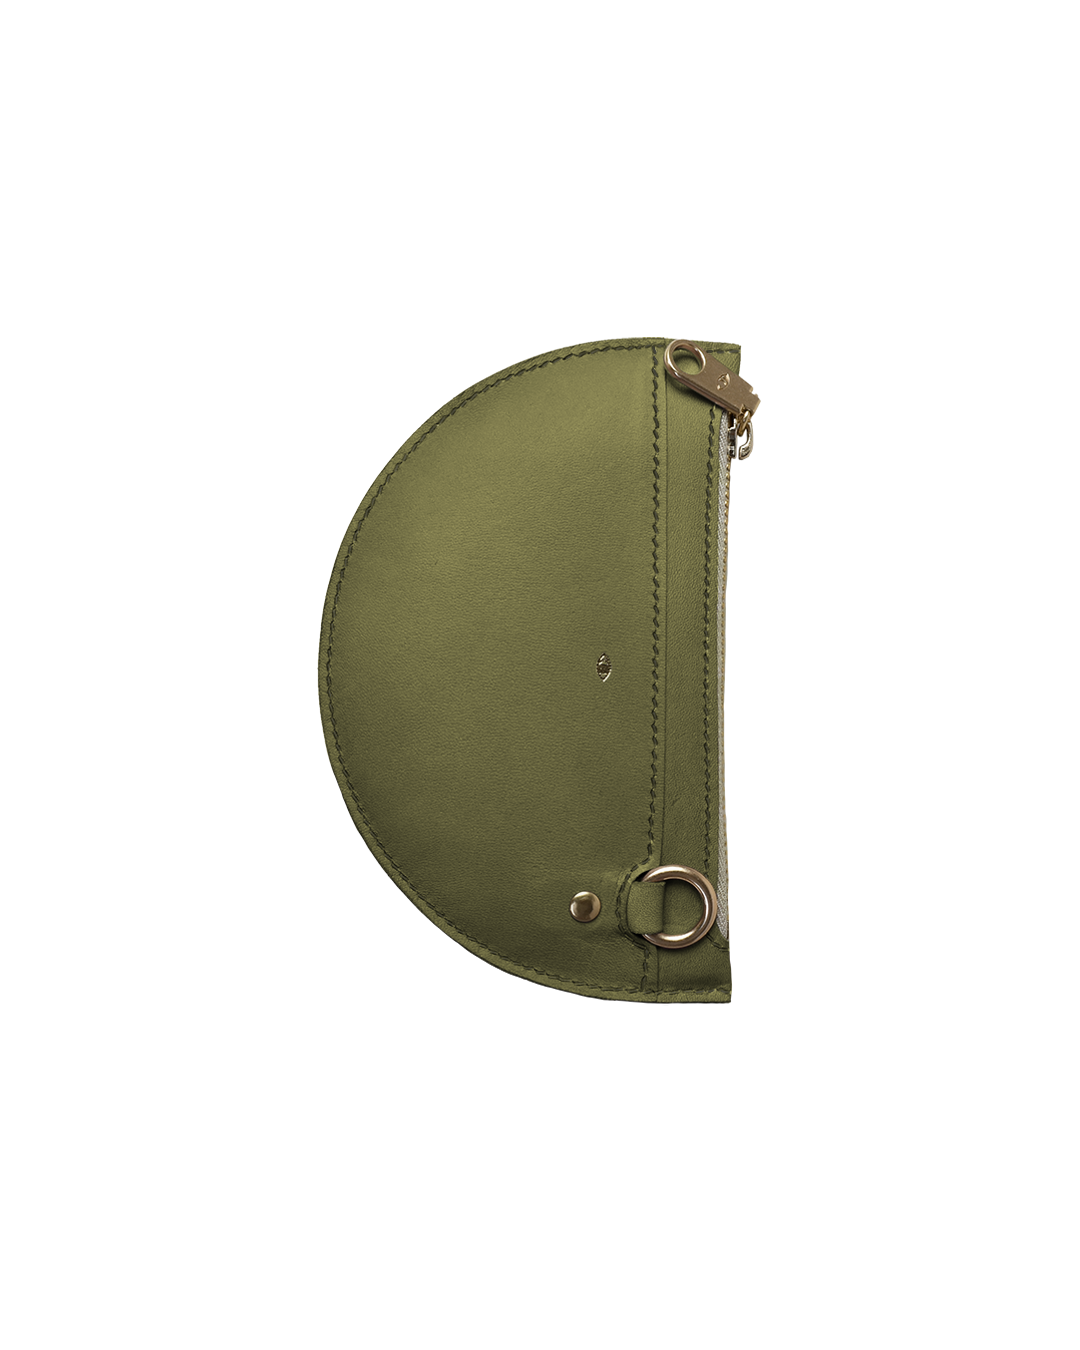 xs crescent moon pouch / olive